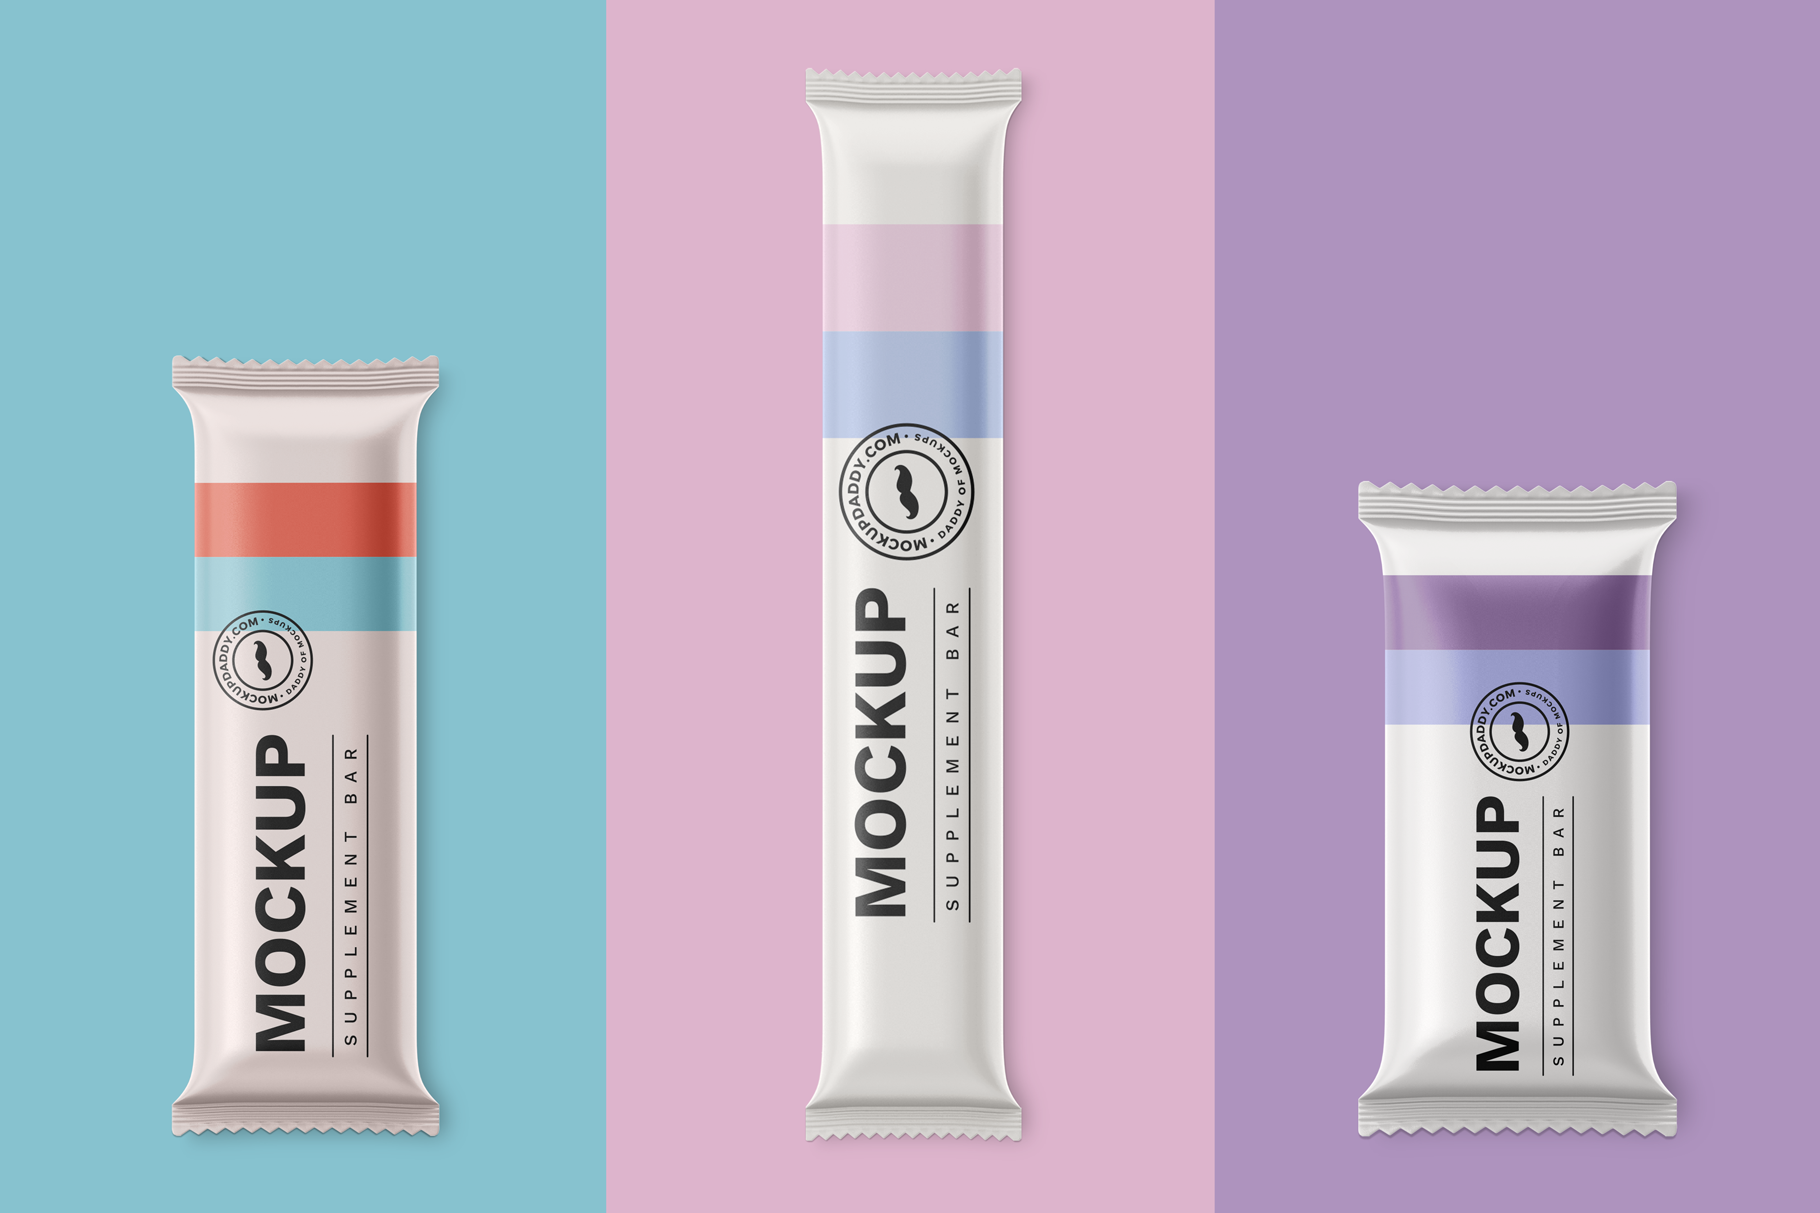 Three different size Protein Bar mockups.